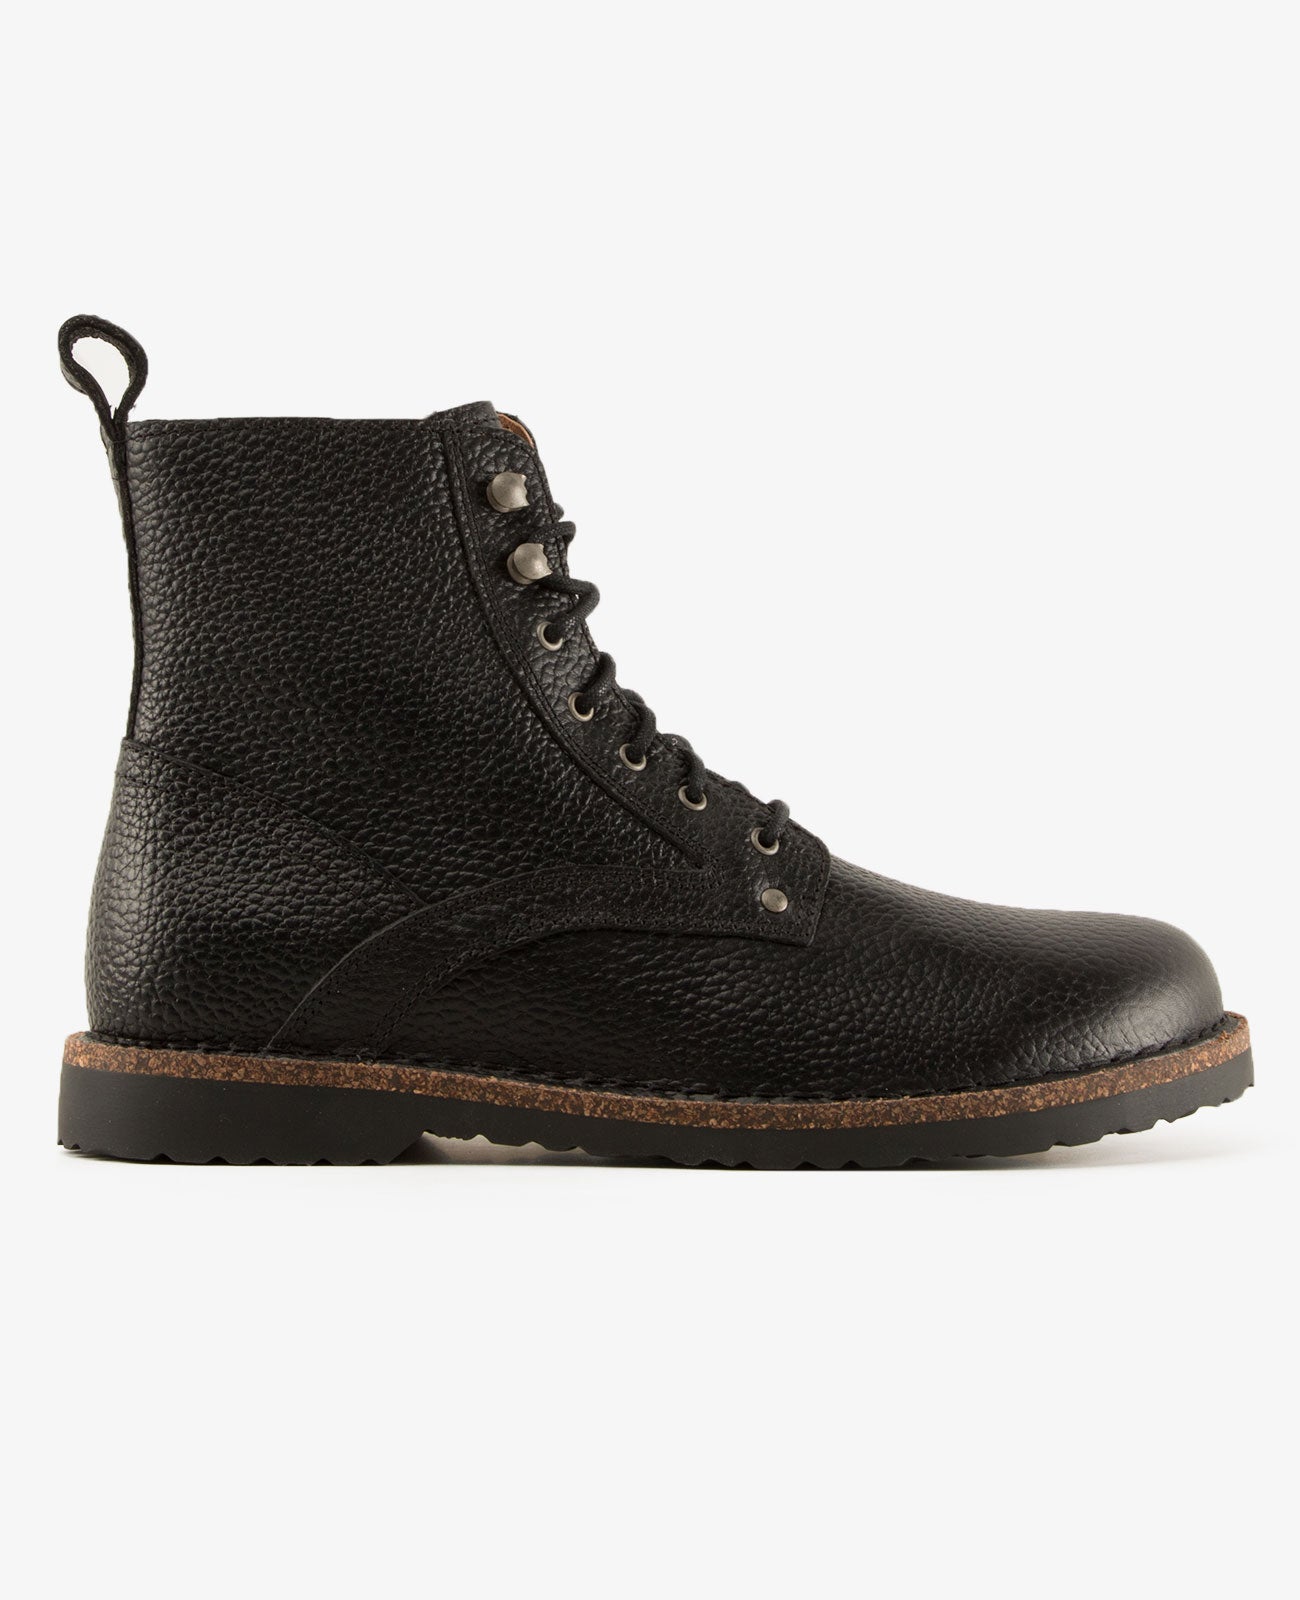 Bryson Natural Leather Black